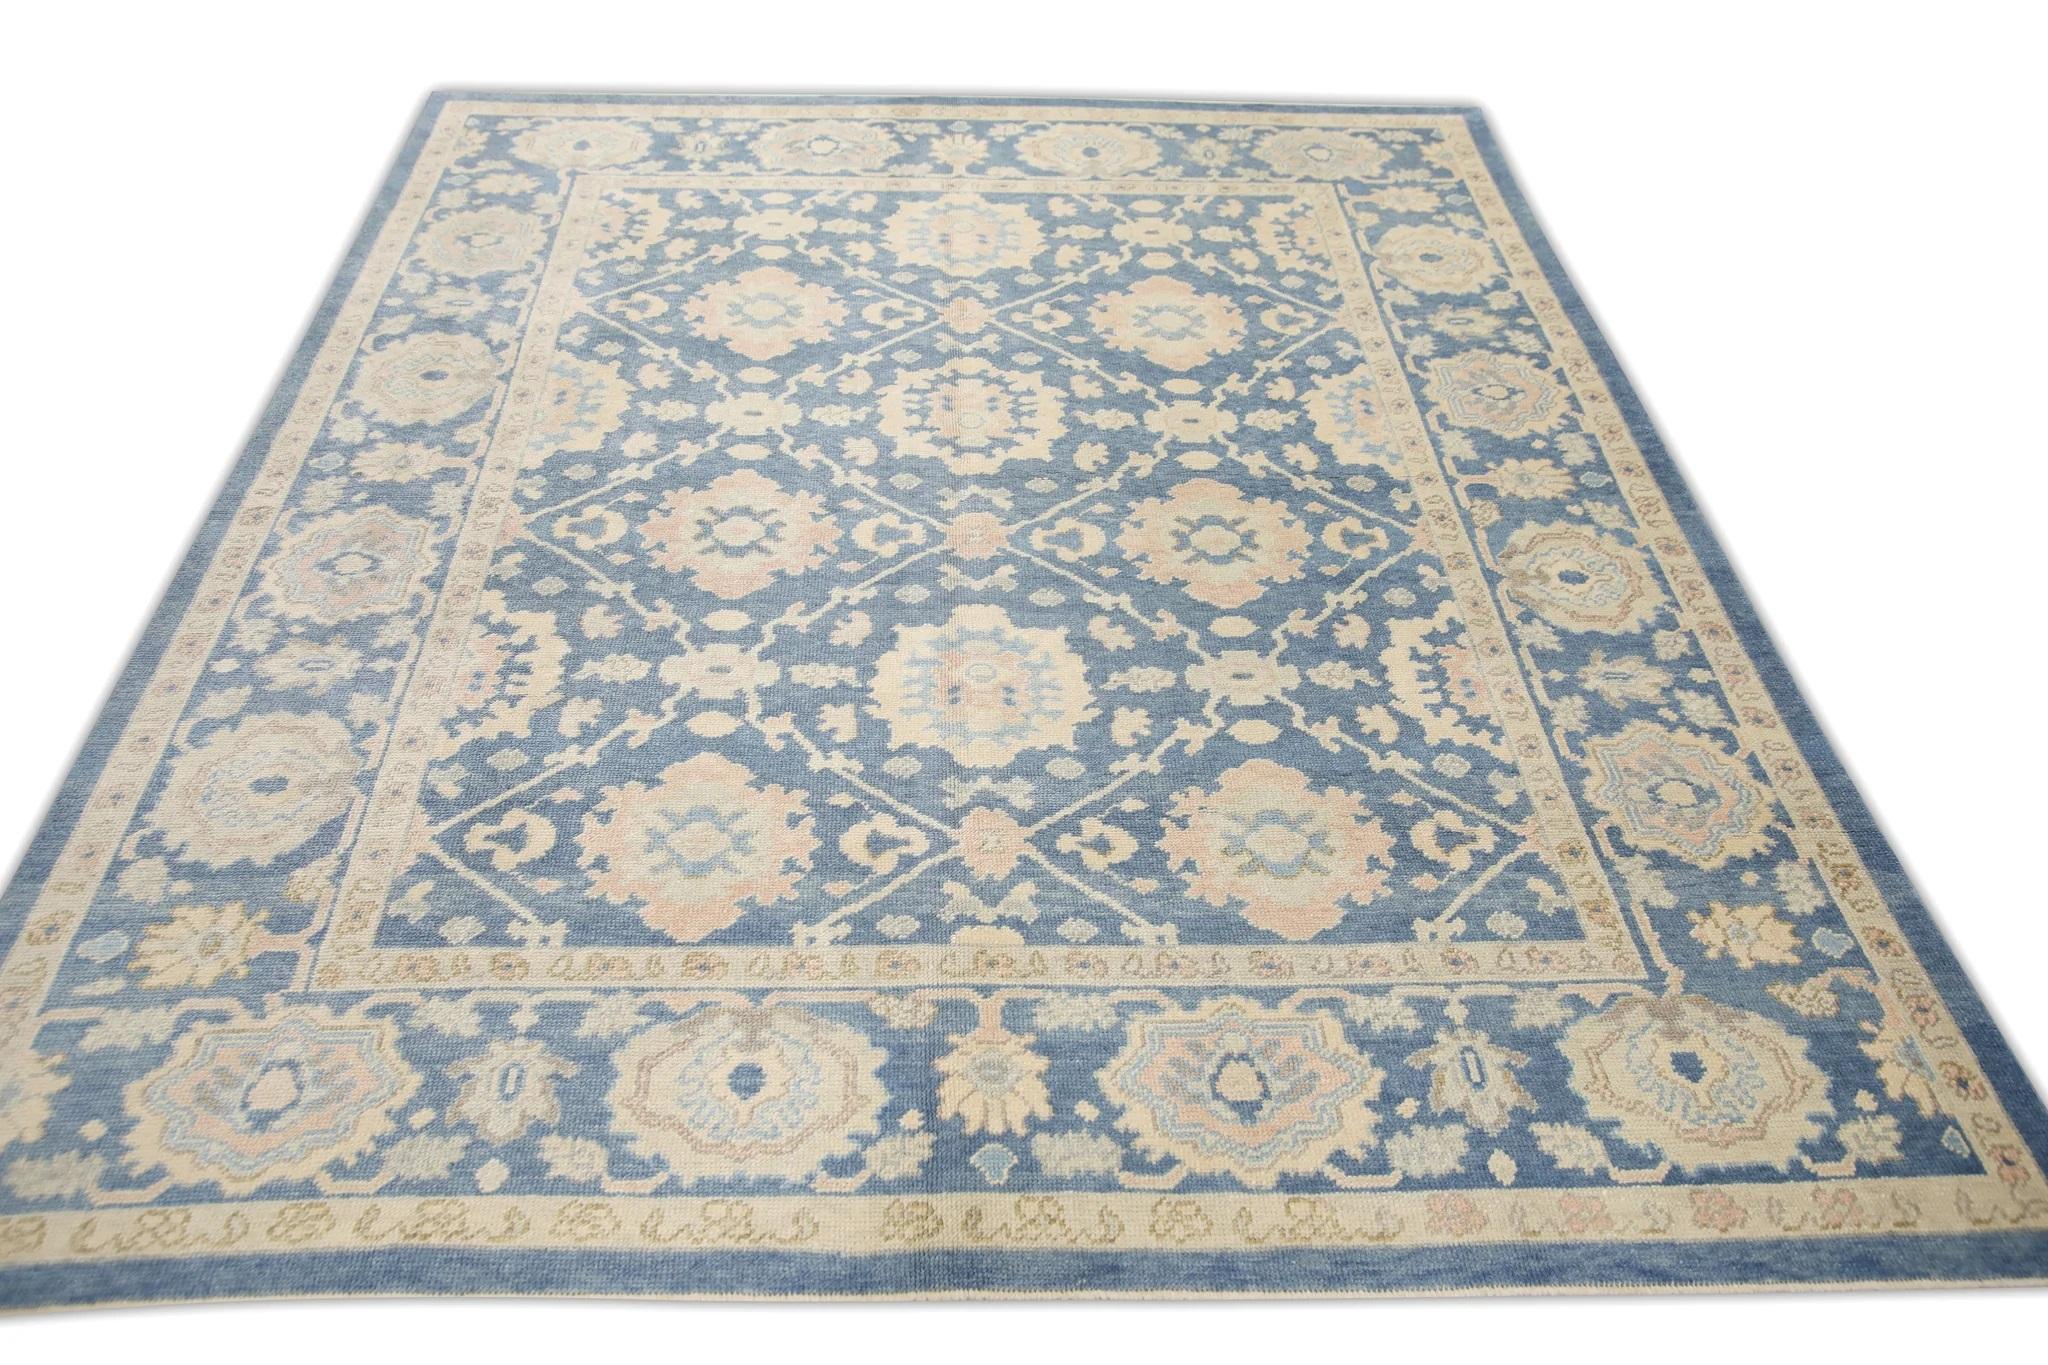 Contemporary Blue & Pink Handwoven Wool Turkish Oushak Rug in Floral Pattern 8'1